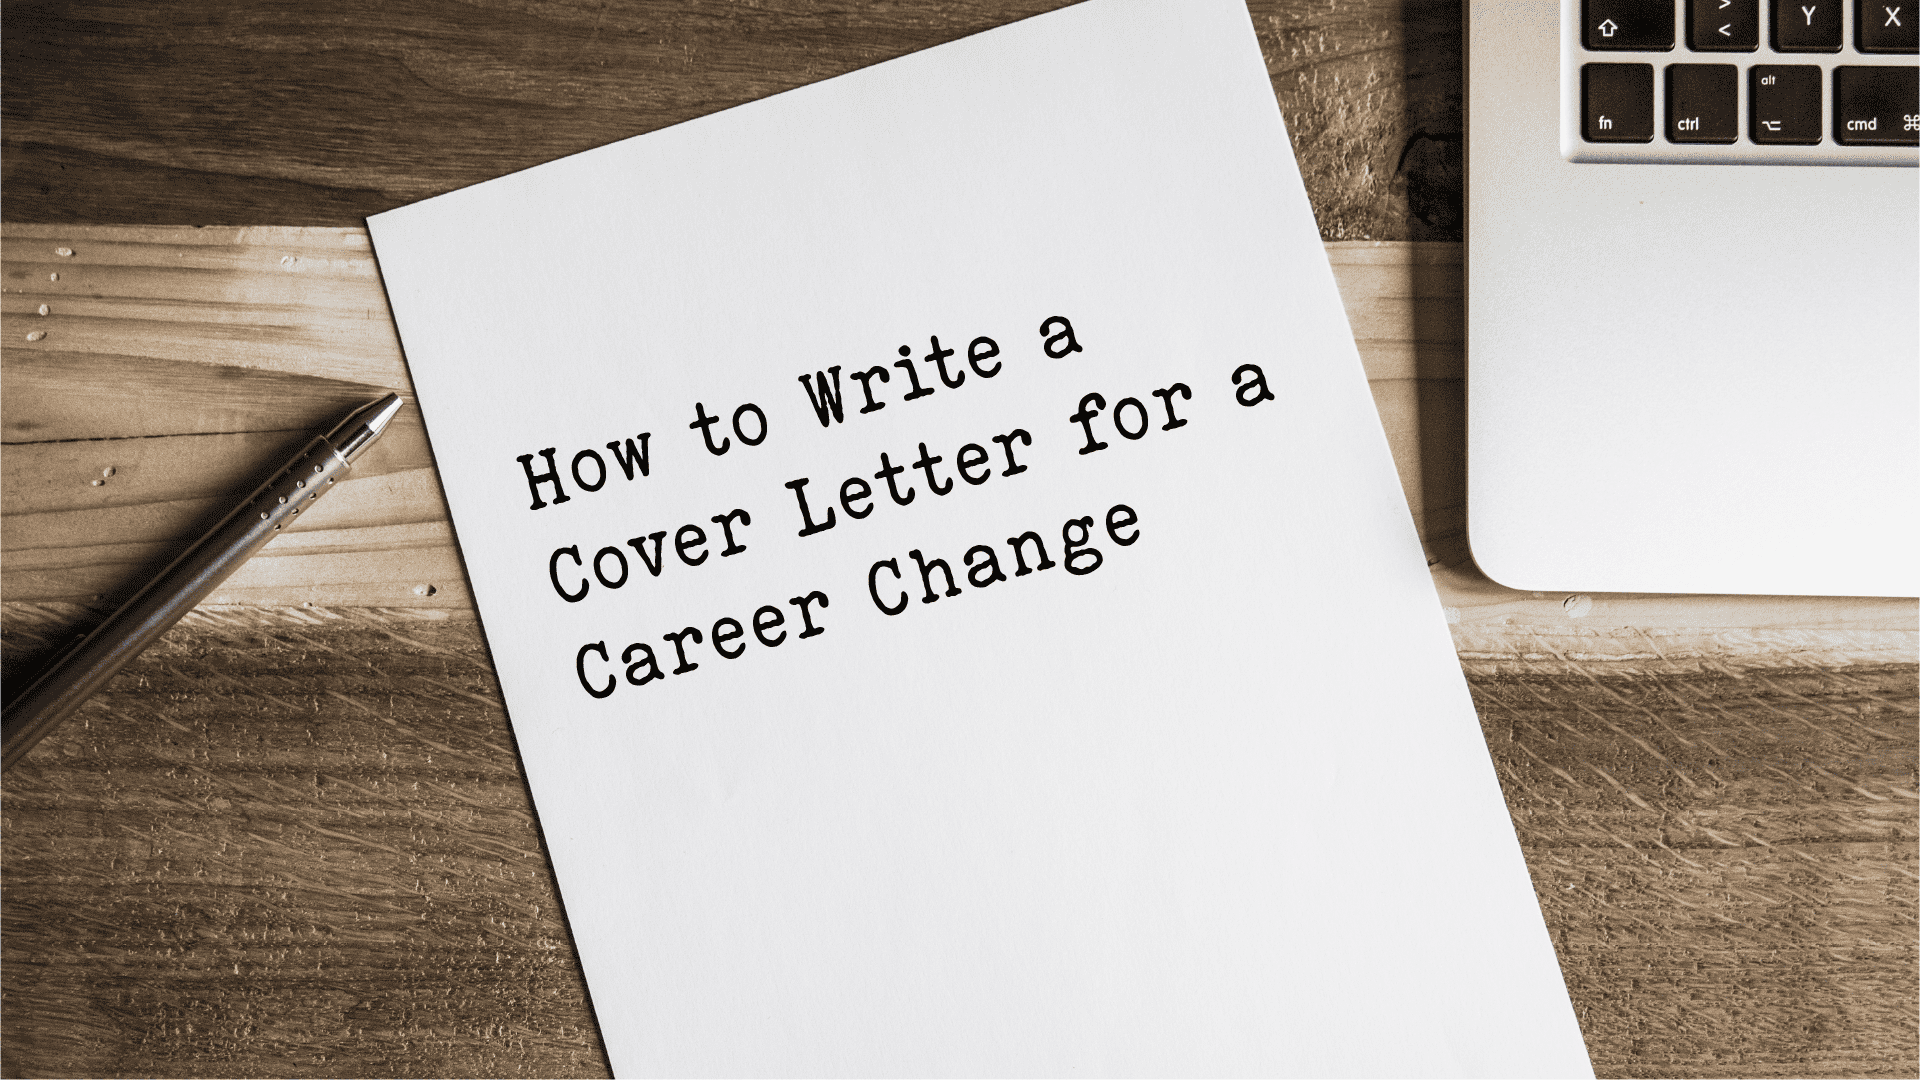 How to Write a Cover Letter for a Career Change